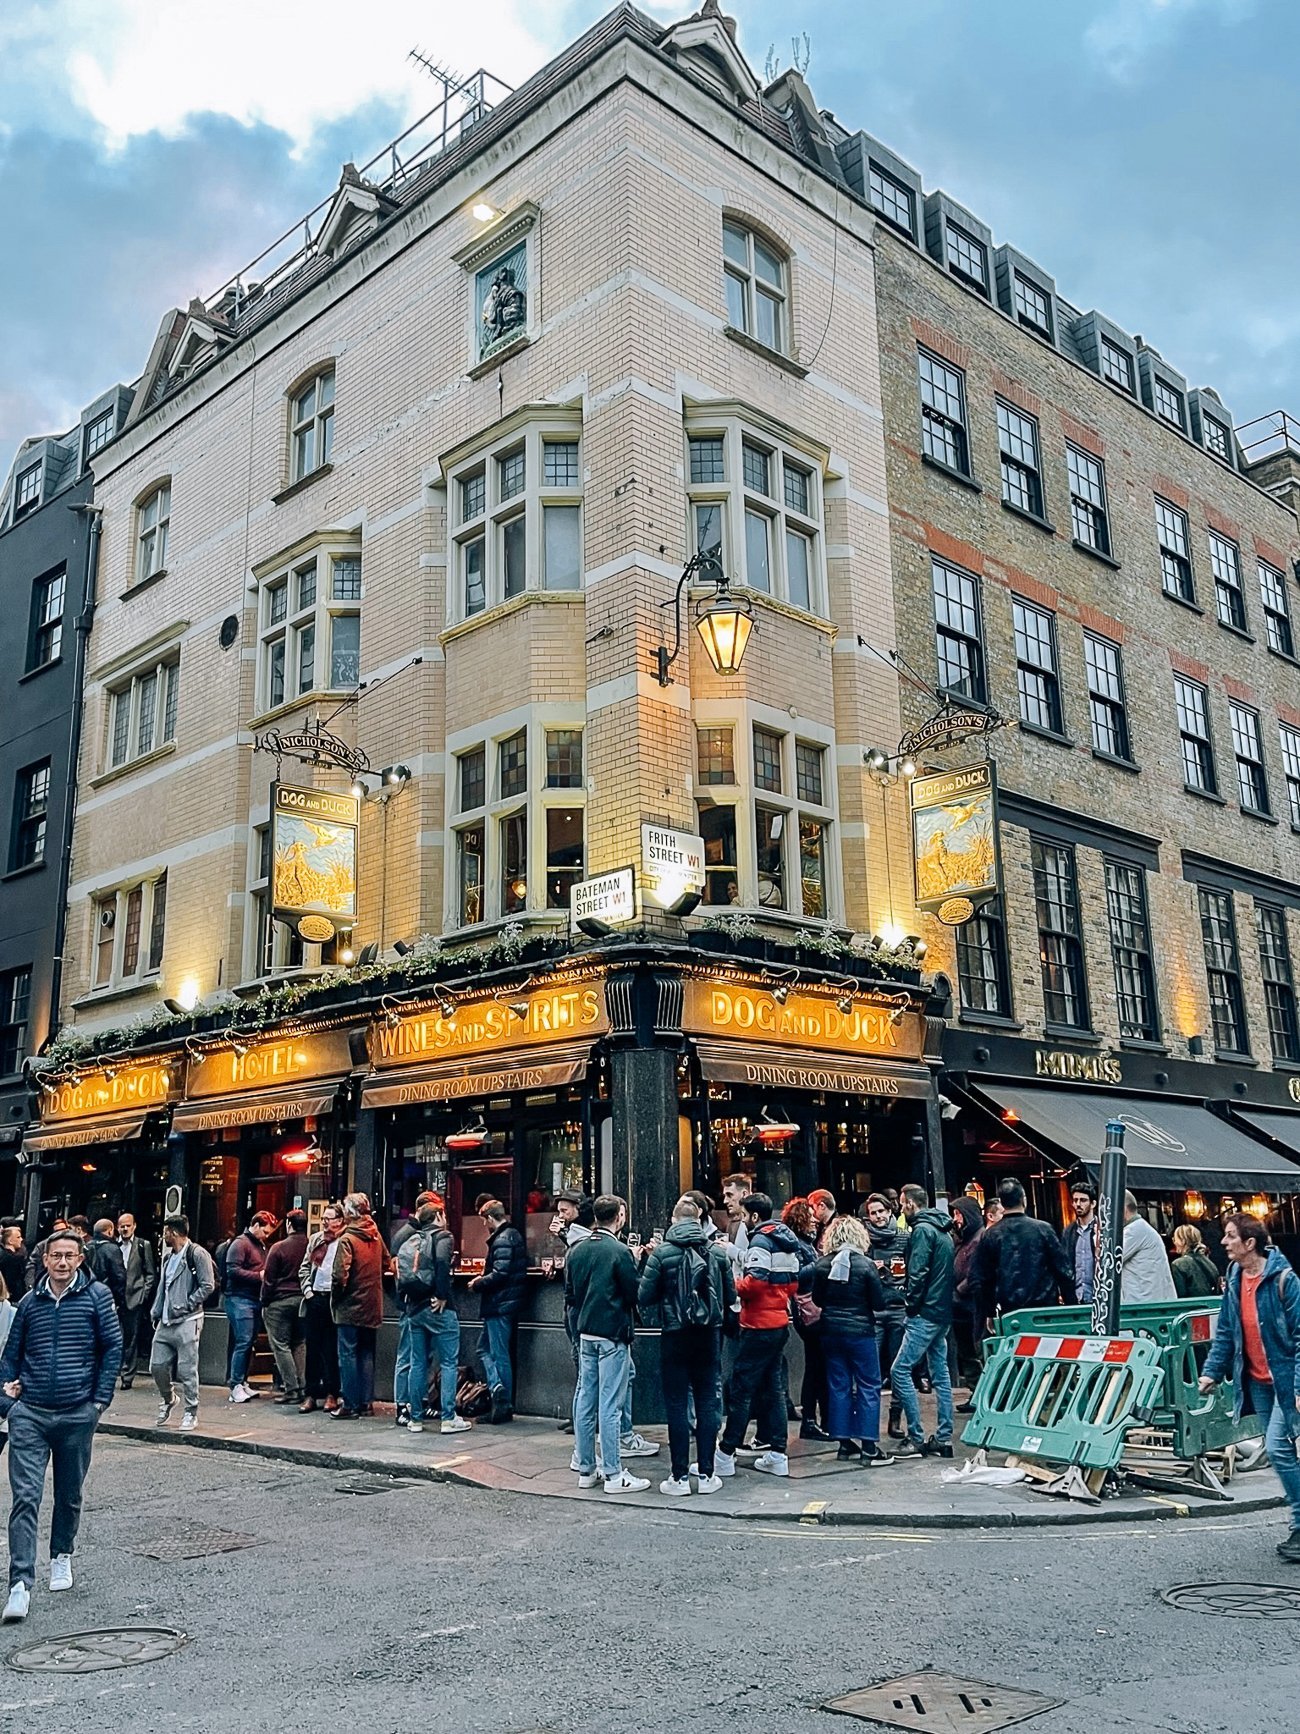 Crowded pub in the evening with people standing outside